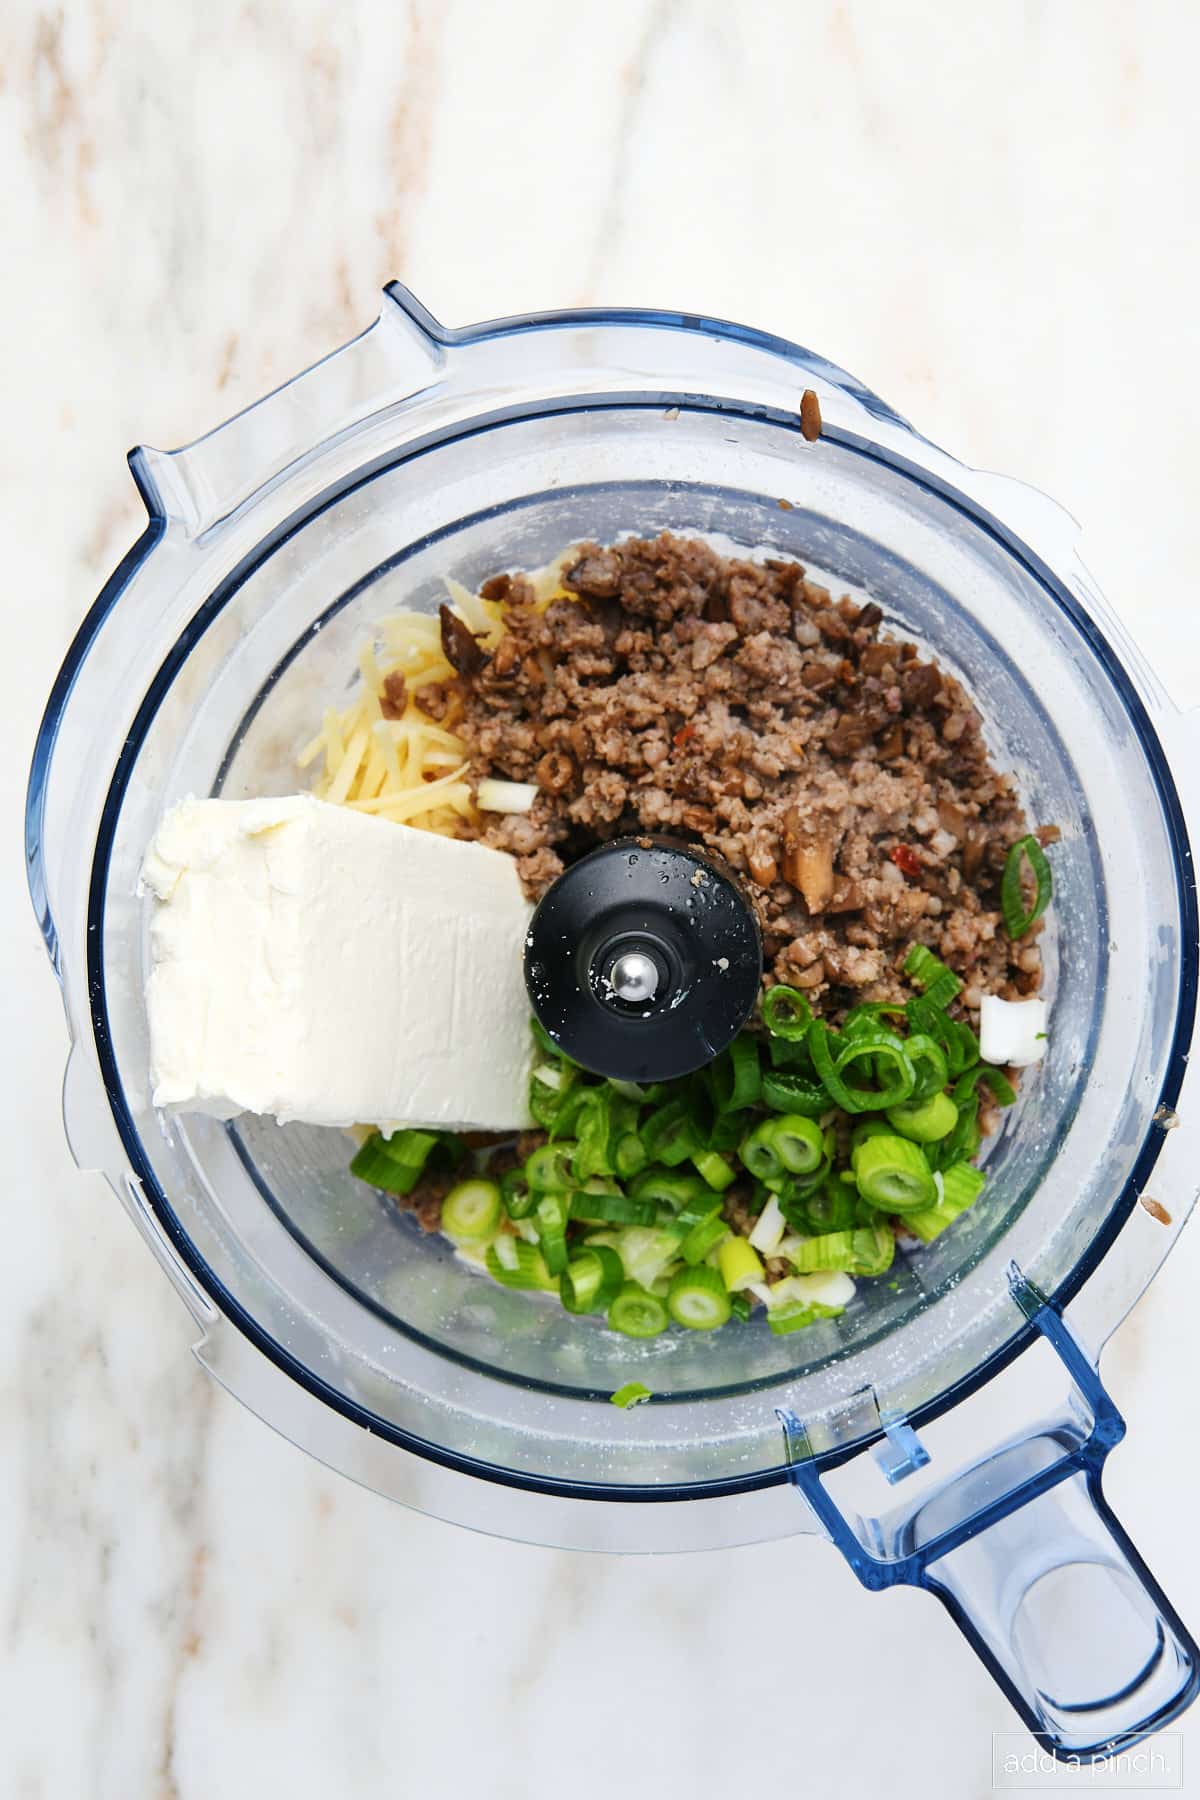 Stuffing ingredients for mushrooms like green peppers, cream cheese, parmesan cheese, and sausage all in a food processor. 